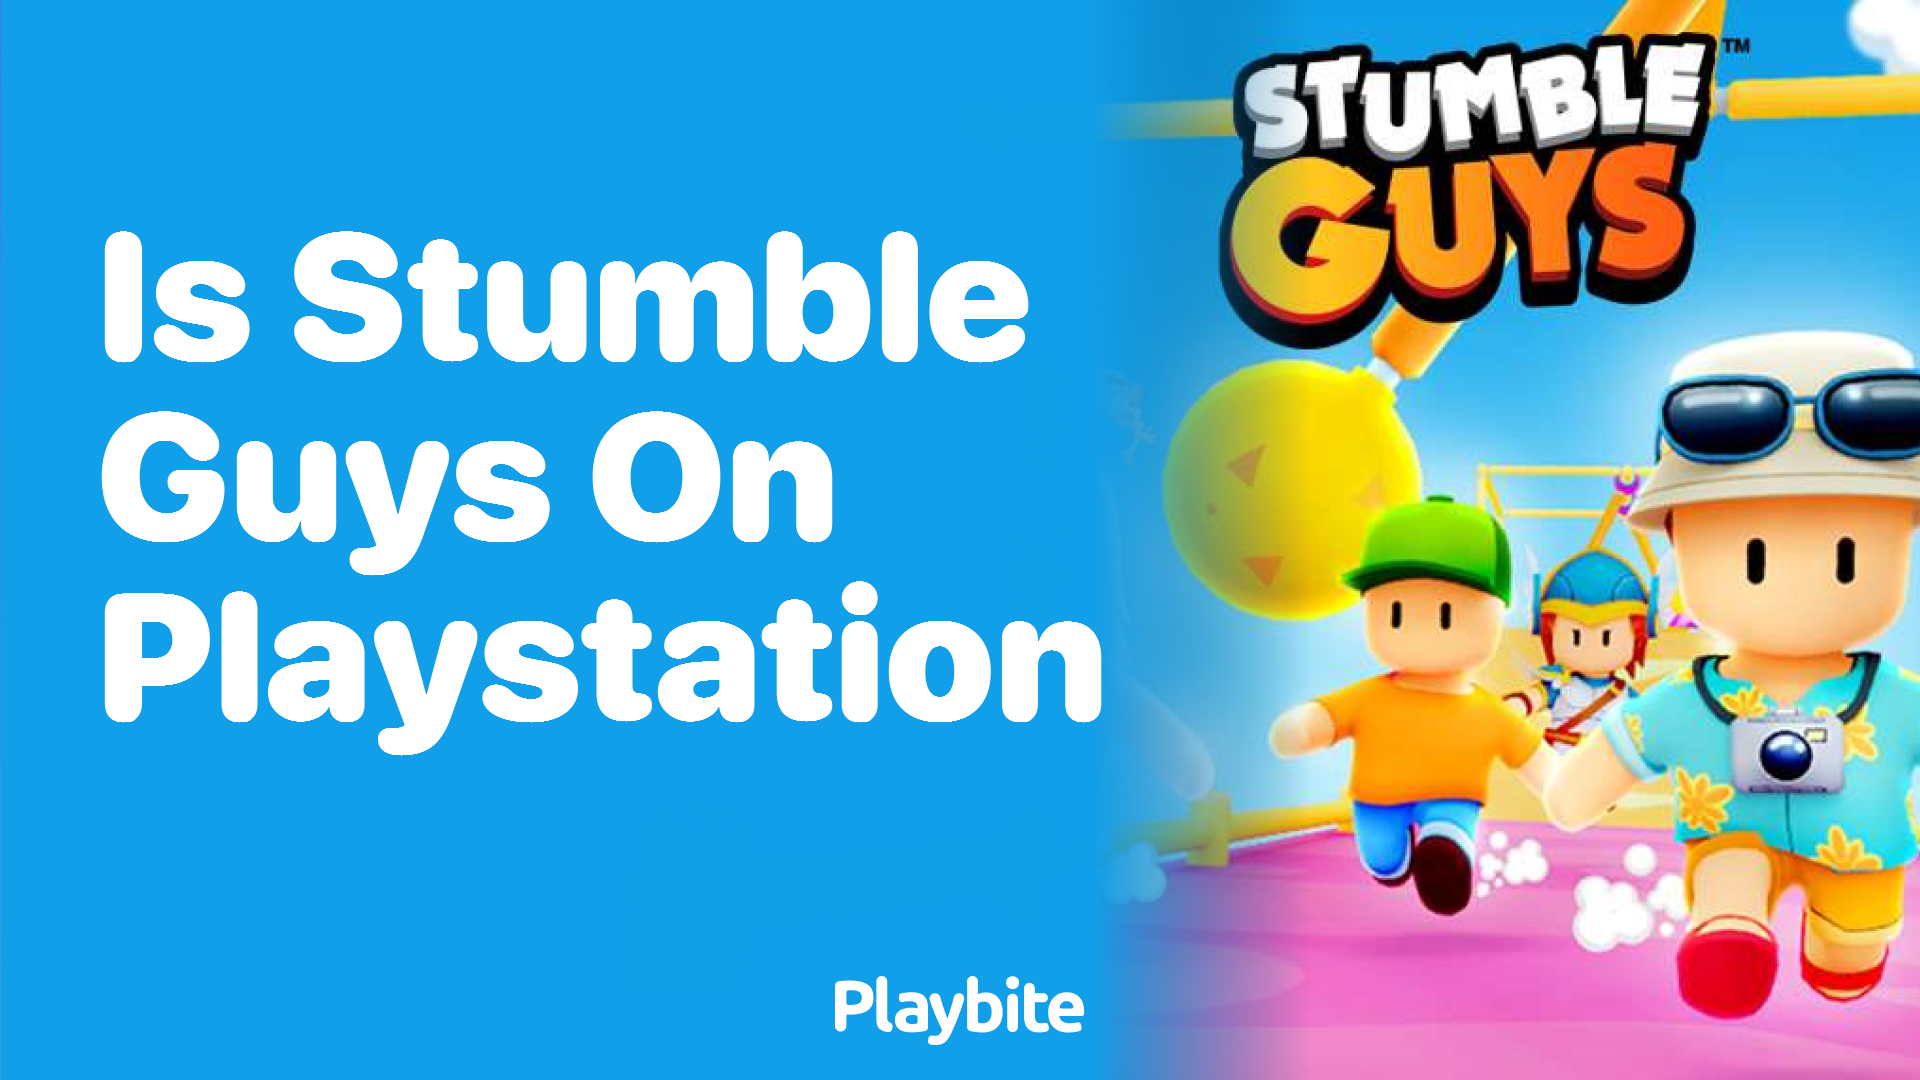 Is Stumble Guys Available on PlayStation?